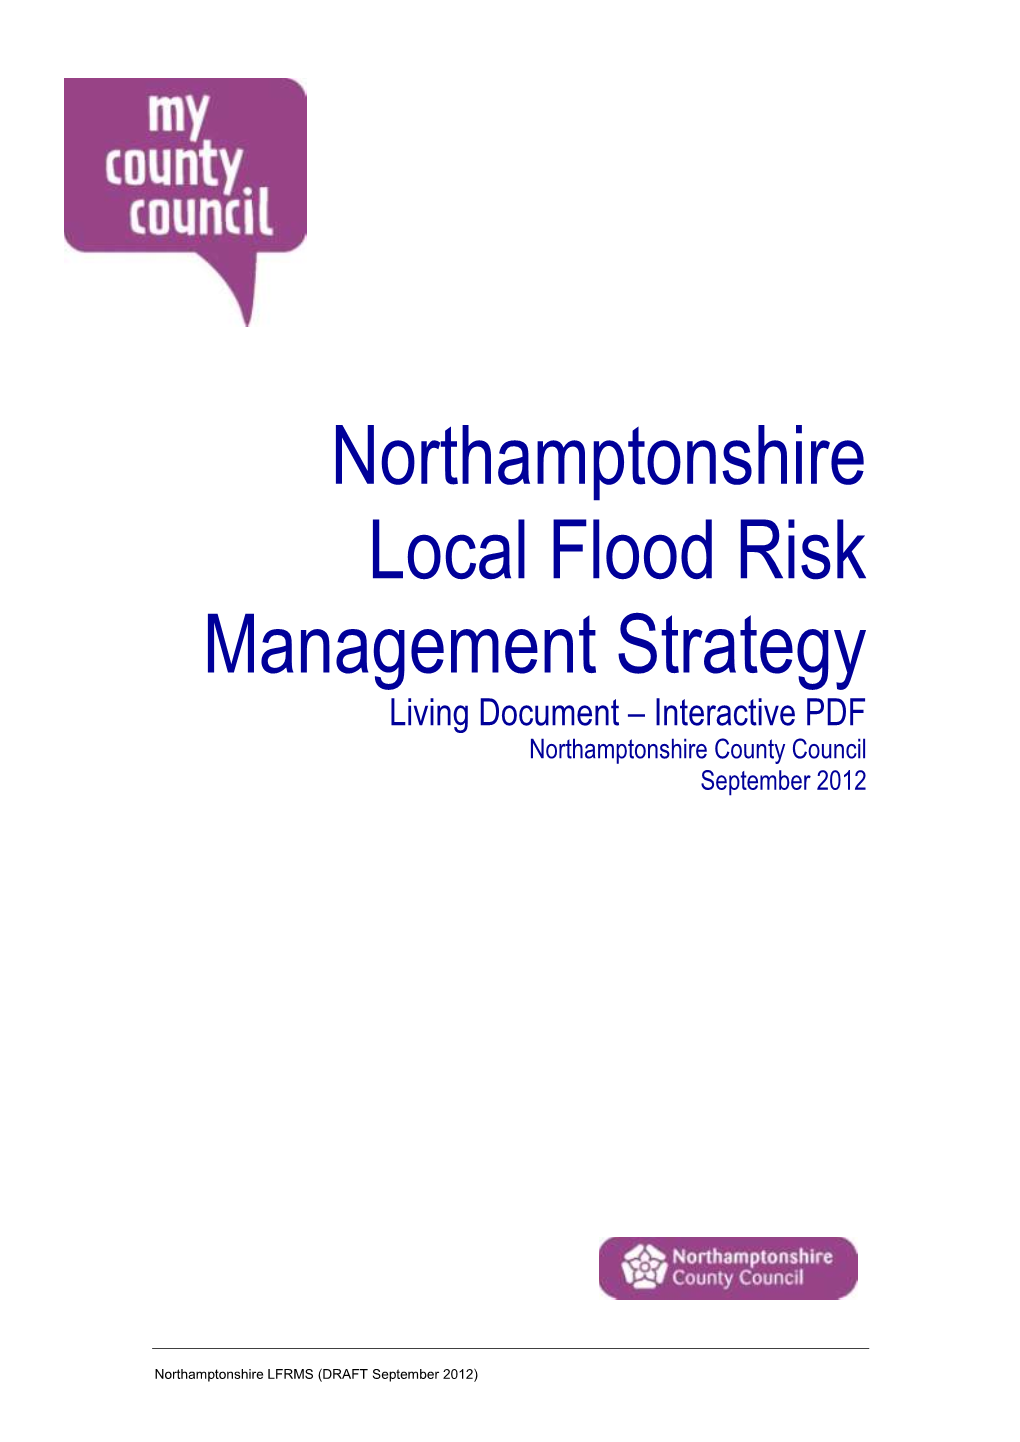 Local Flood Risk Management Strategy Living Document – Interactive PDF Northamptonshire County Council September 2012